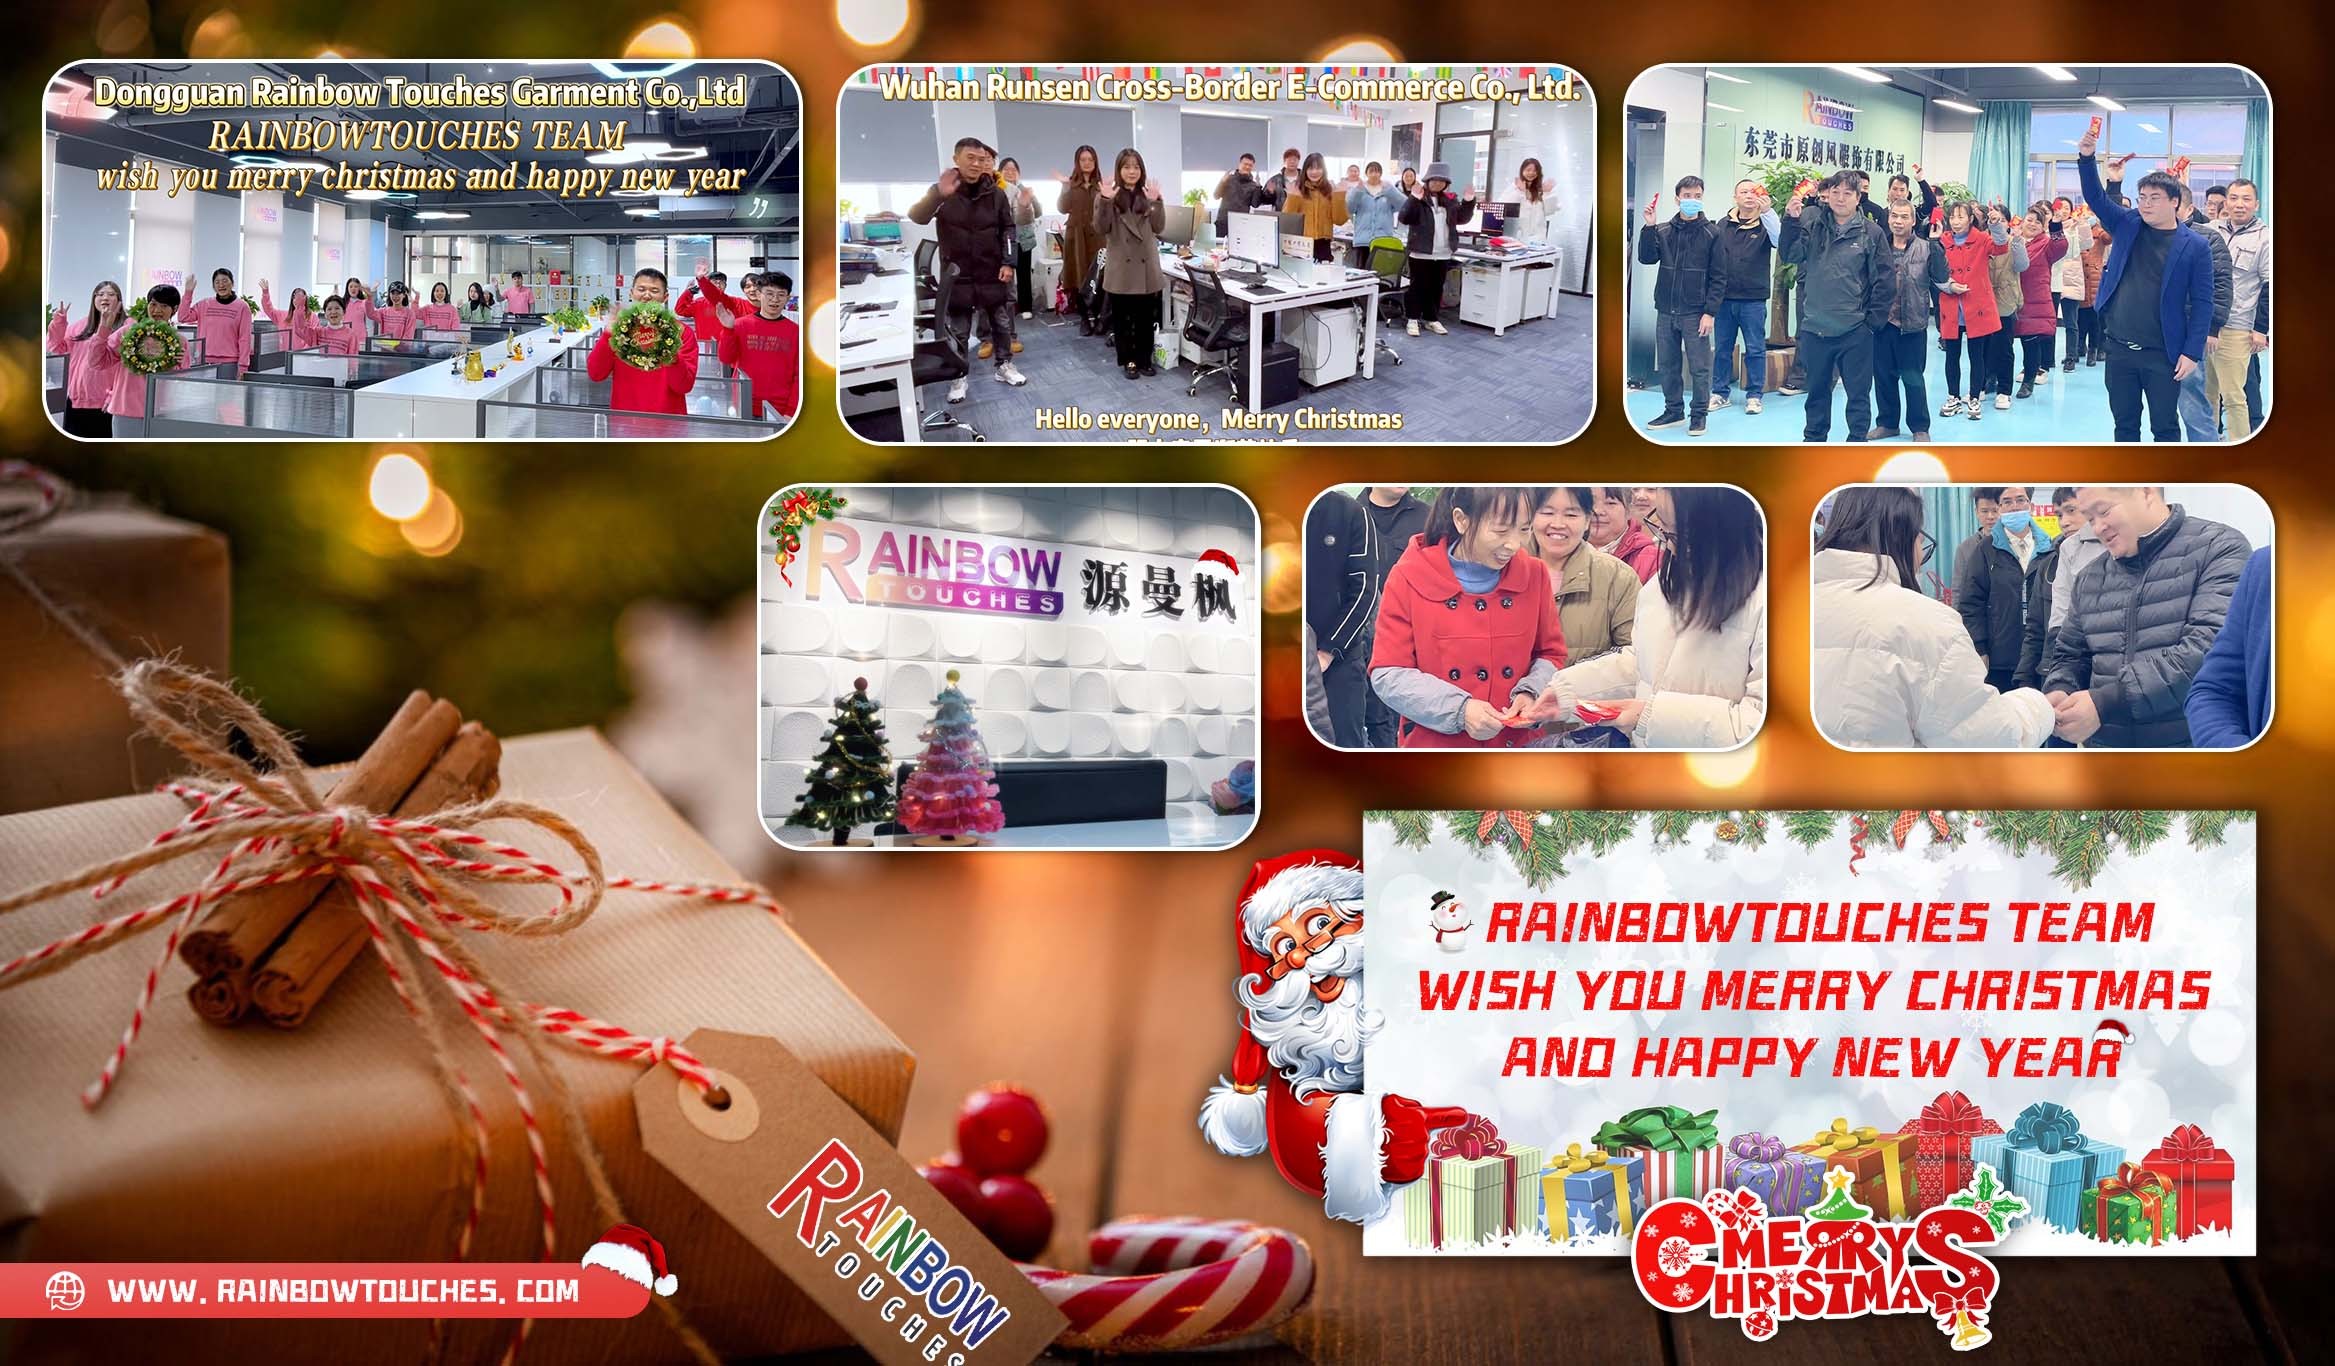 Merry Christmas From Rainbow Touches! Thank You For Being Our Valued Customer!